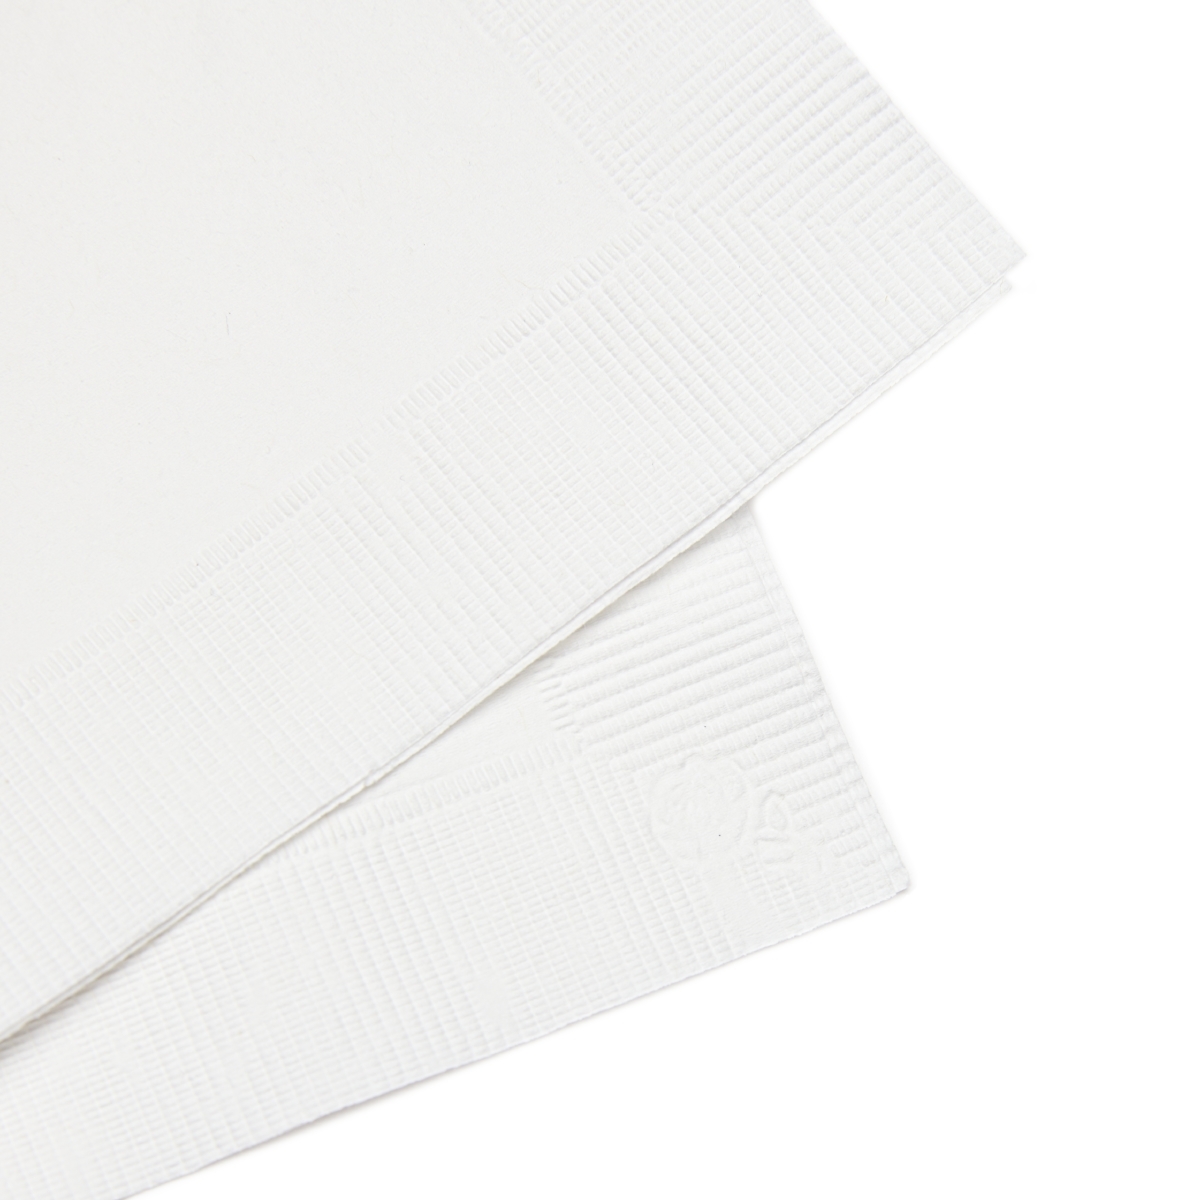 Primary image for Customizable White Napkins with Coined Edge for Special Events - Soft 3-Ply Pape